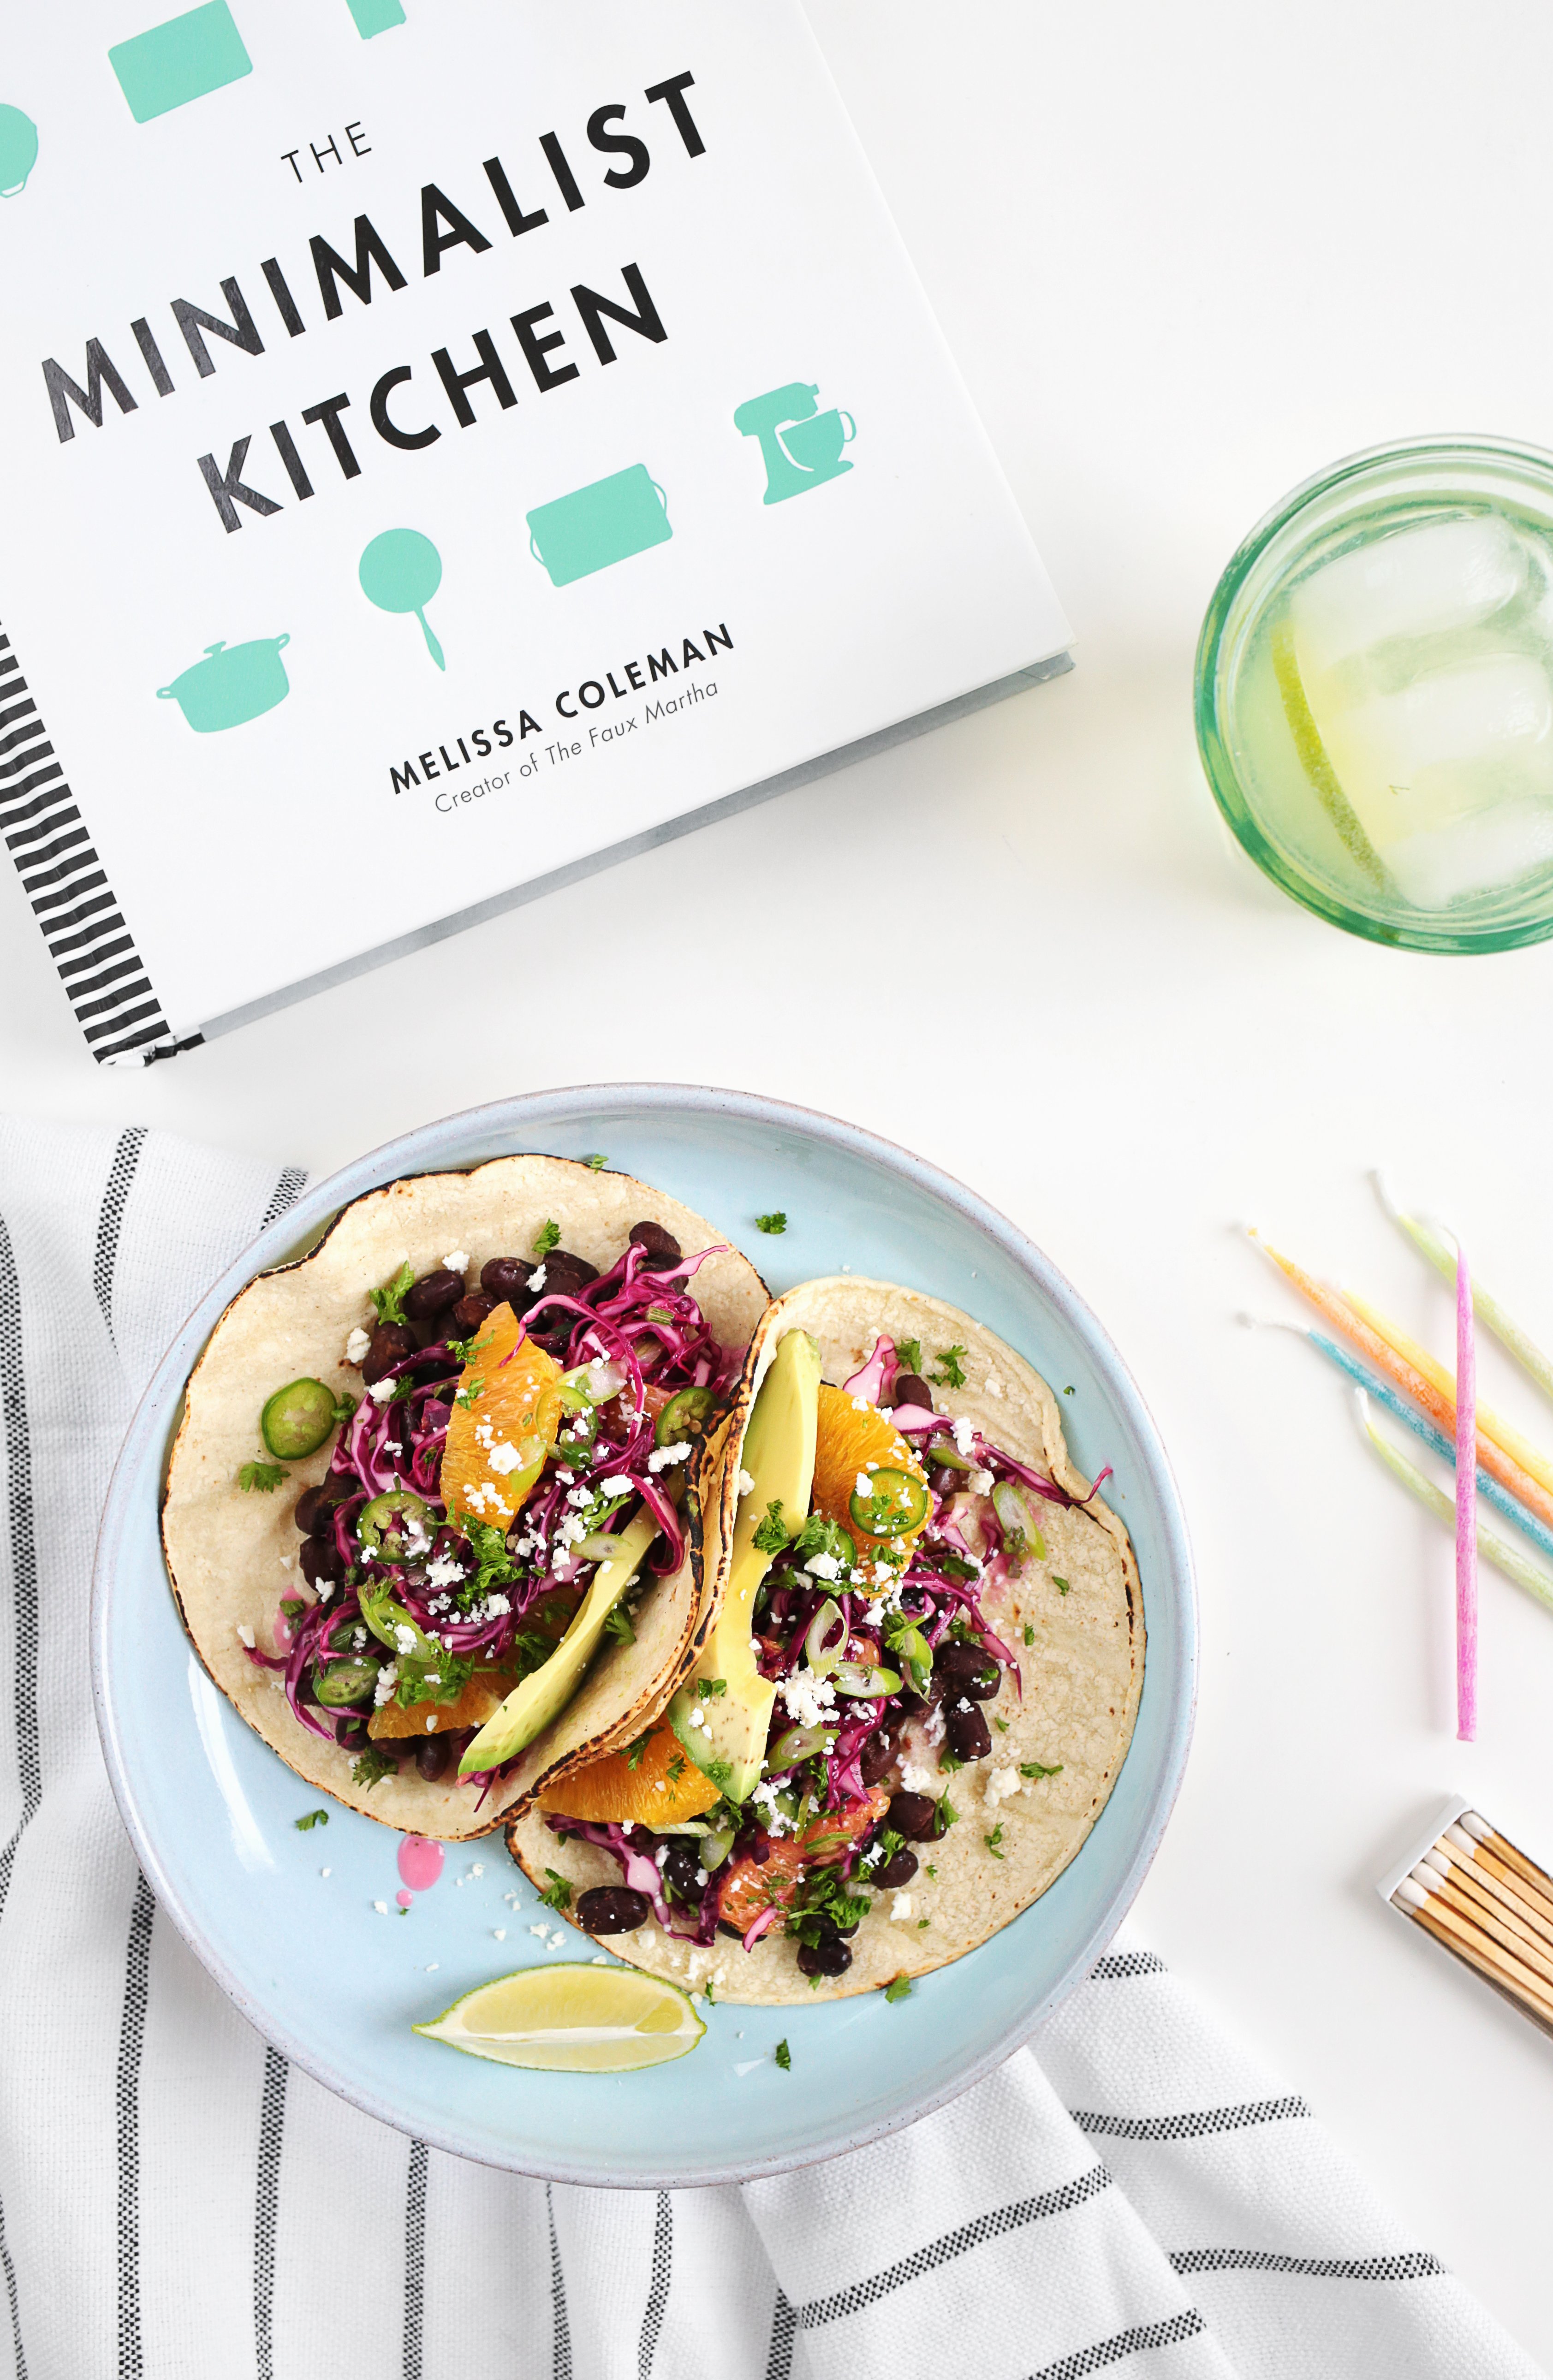 The Minimalist Kitchen book launch from Melissa Coleman of The Fauxmartha